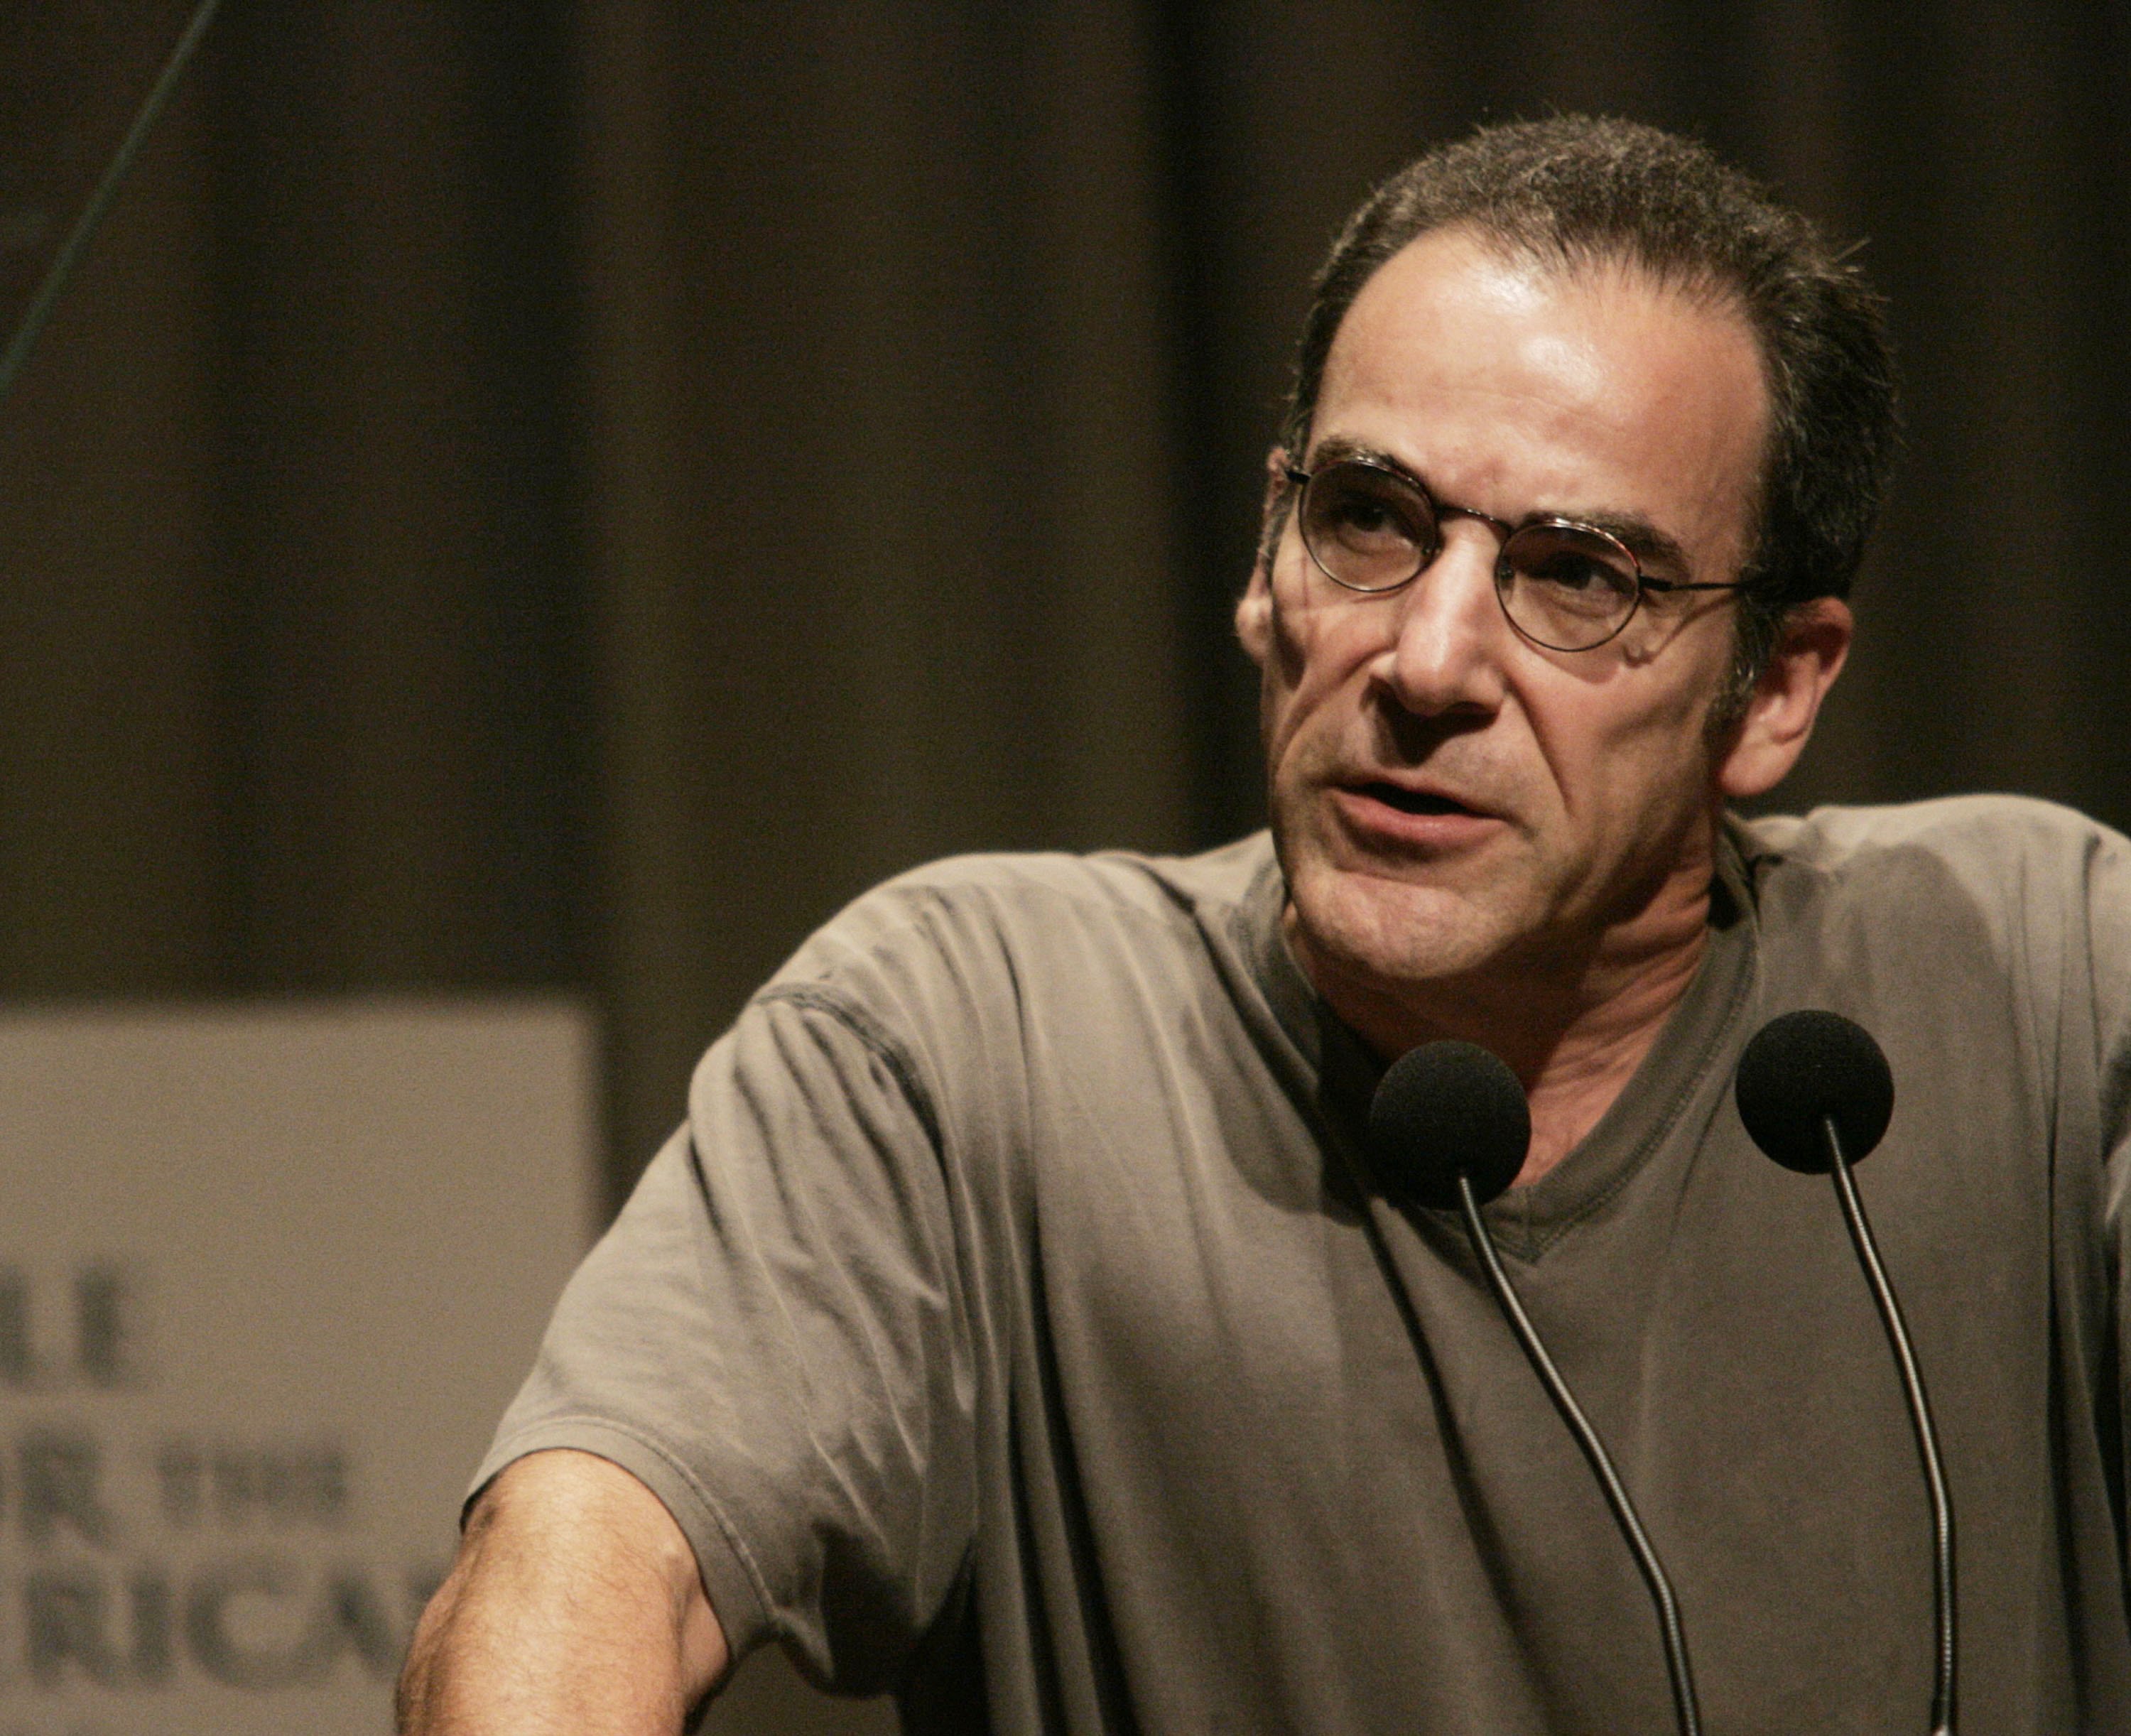 Mandy Patinkin attends a reading of the U.S. Constitution at Cooper Union in September 1, 2004. | Photo: GettyImages 